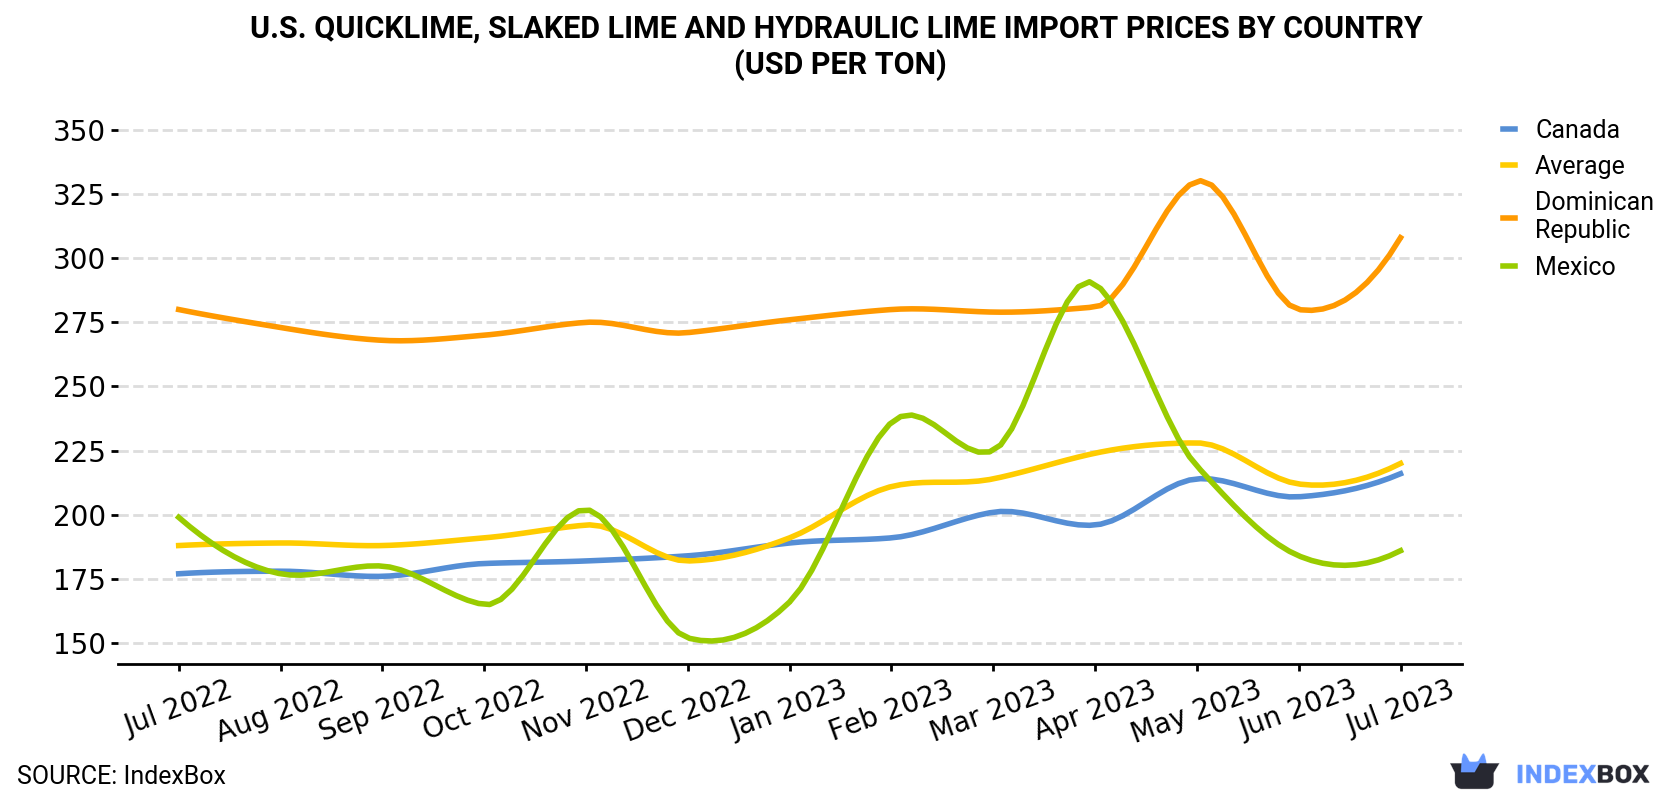 U.S. Quicklime, Slaked Lime And Hydraulic Lime Import Prices By Country (USD Per Ton)